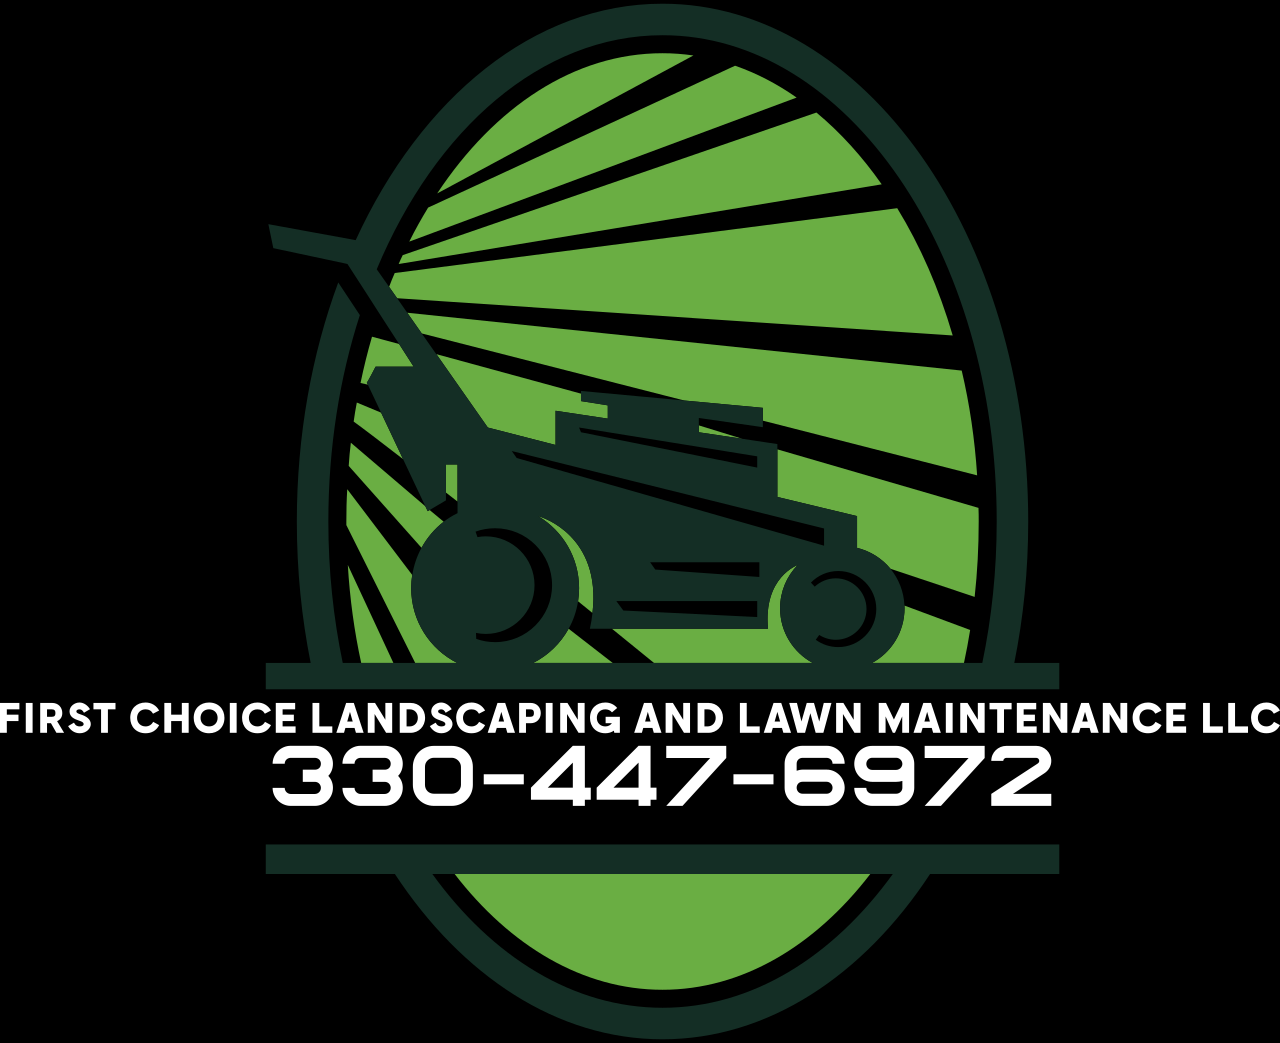 First choice landscaping and lawn maintenance LLC 's logo